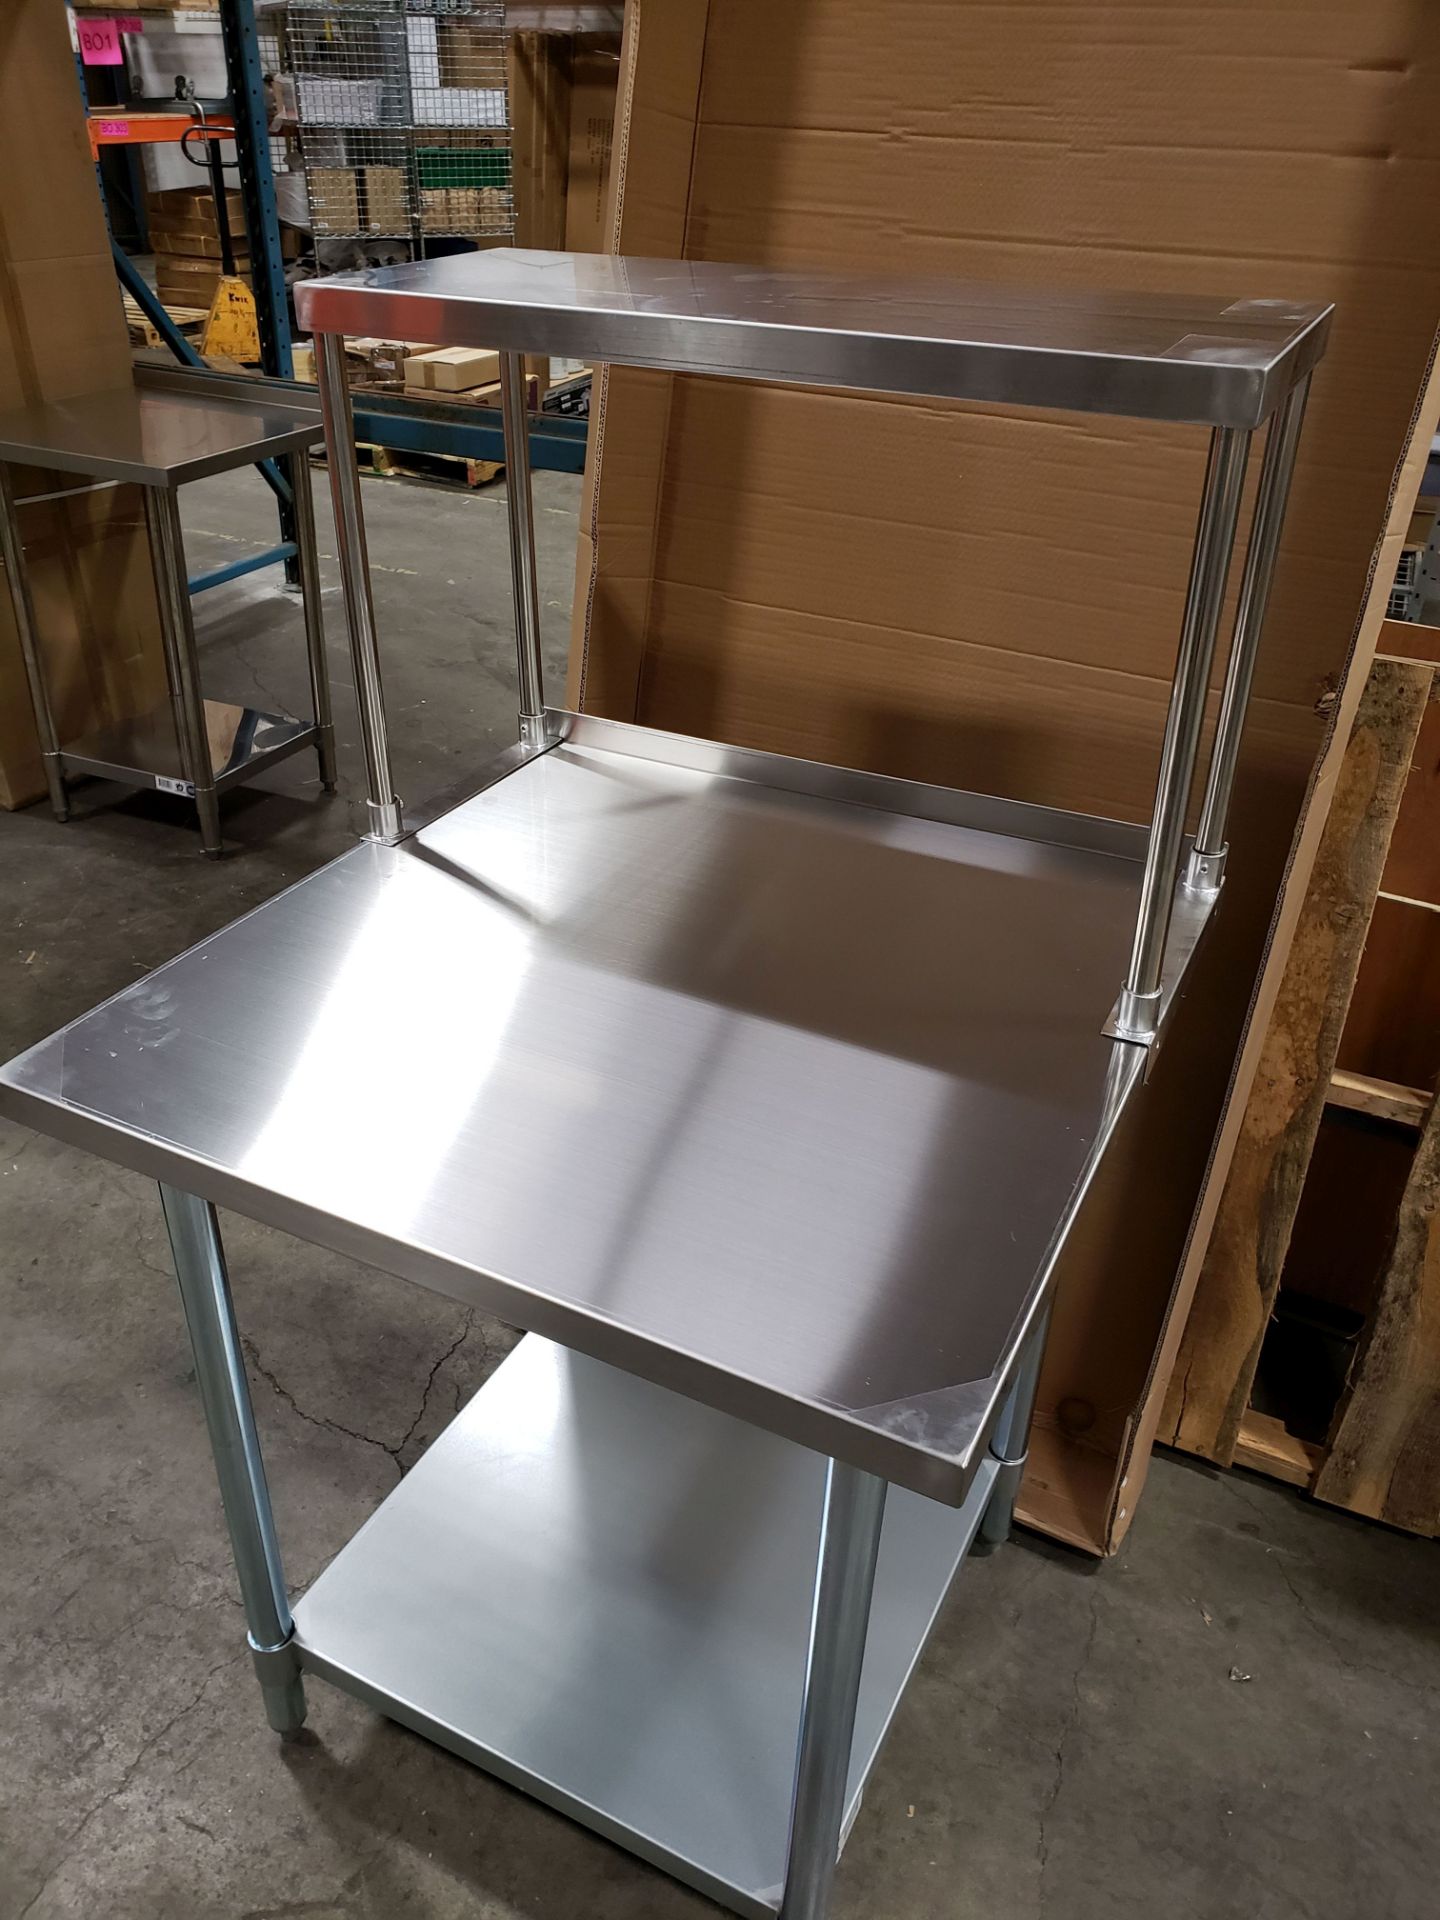 30" x 30" Stainless Table with 1.5" Backsplash and 12" x 30" Overshelf